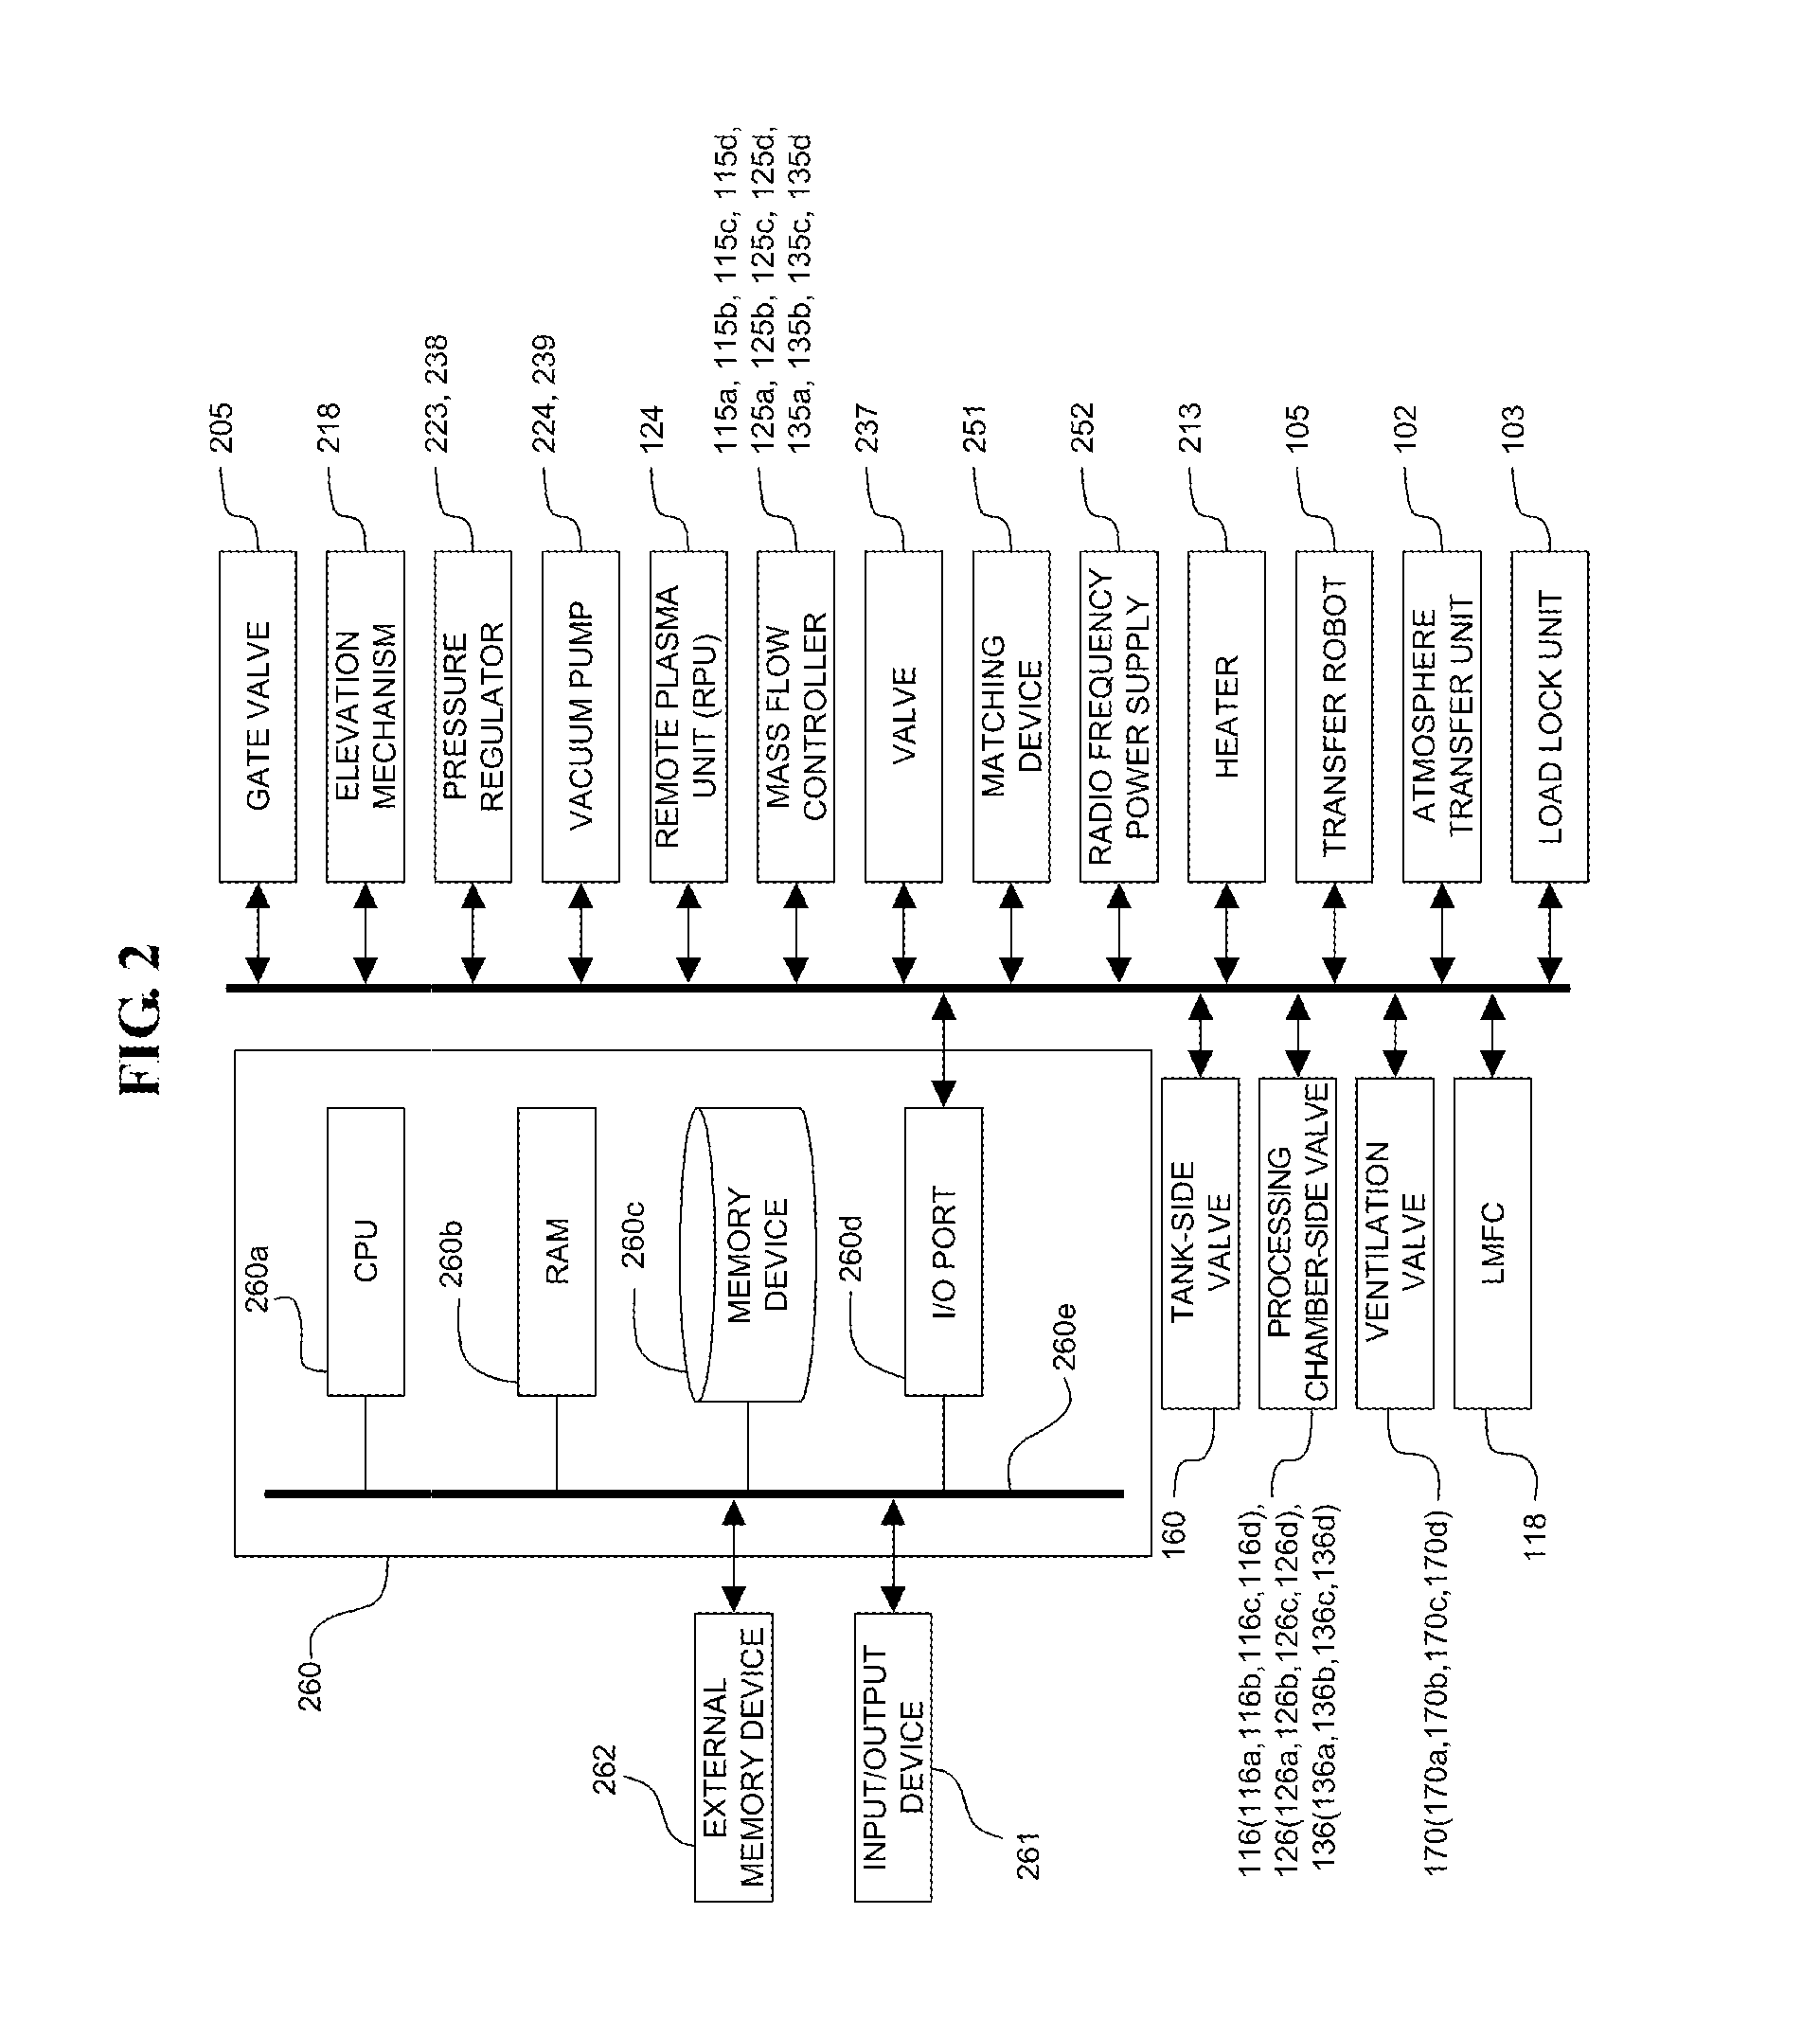 Substrate processing system, method of manufacturing semiconductor device and non-transitory computer-readable recording medium